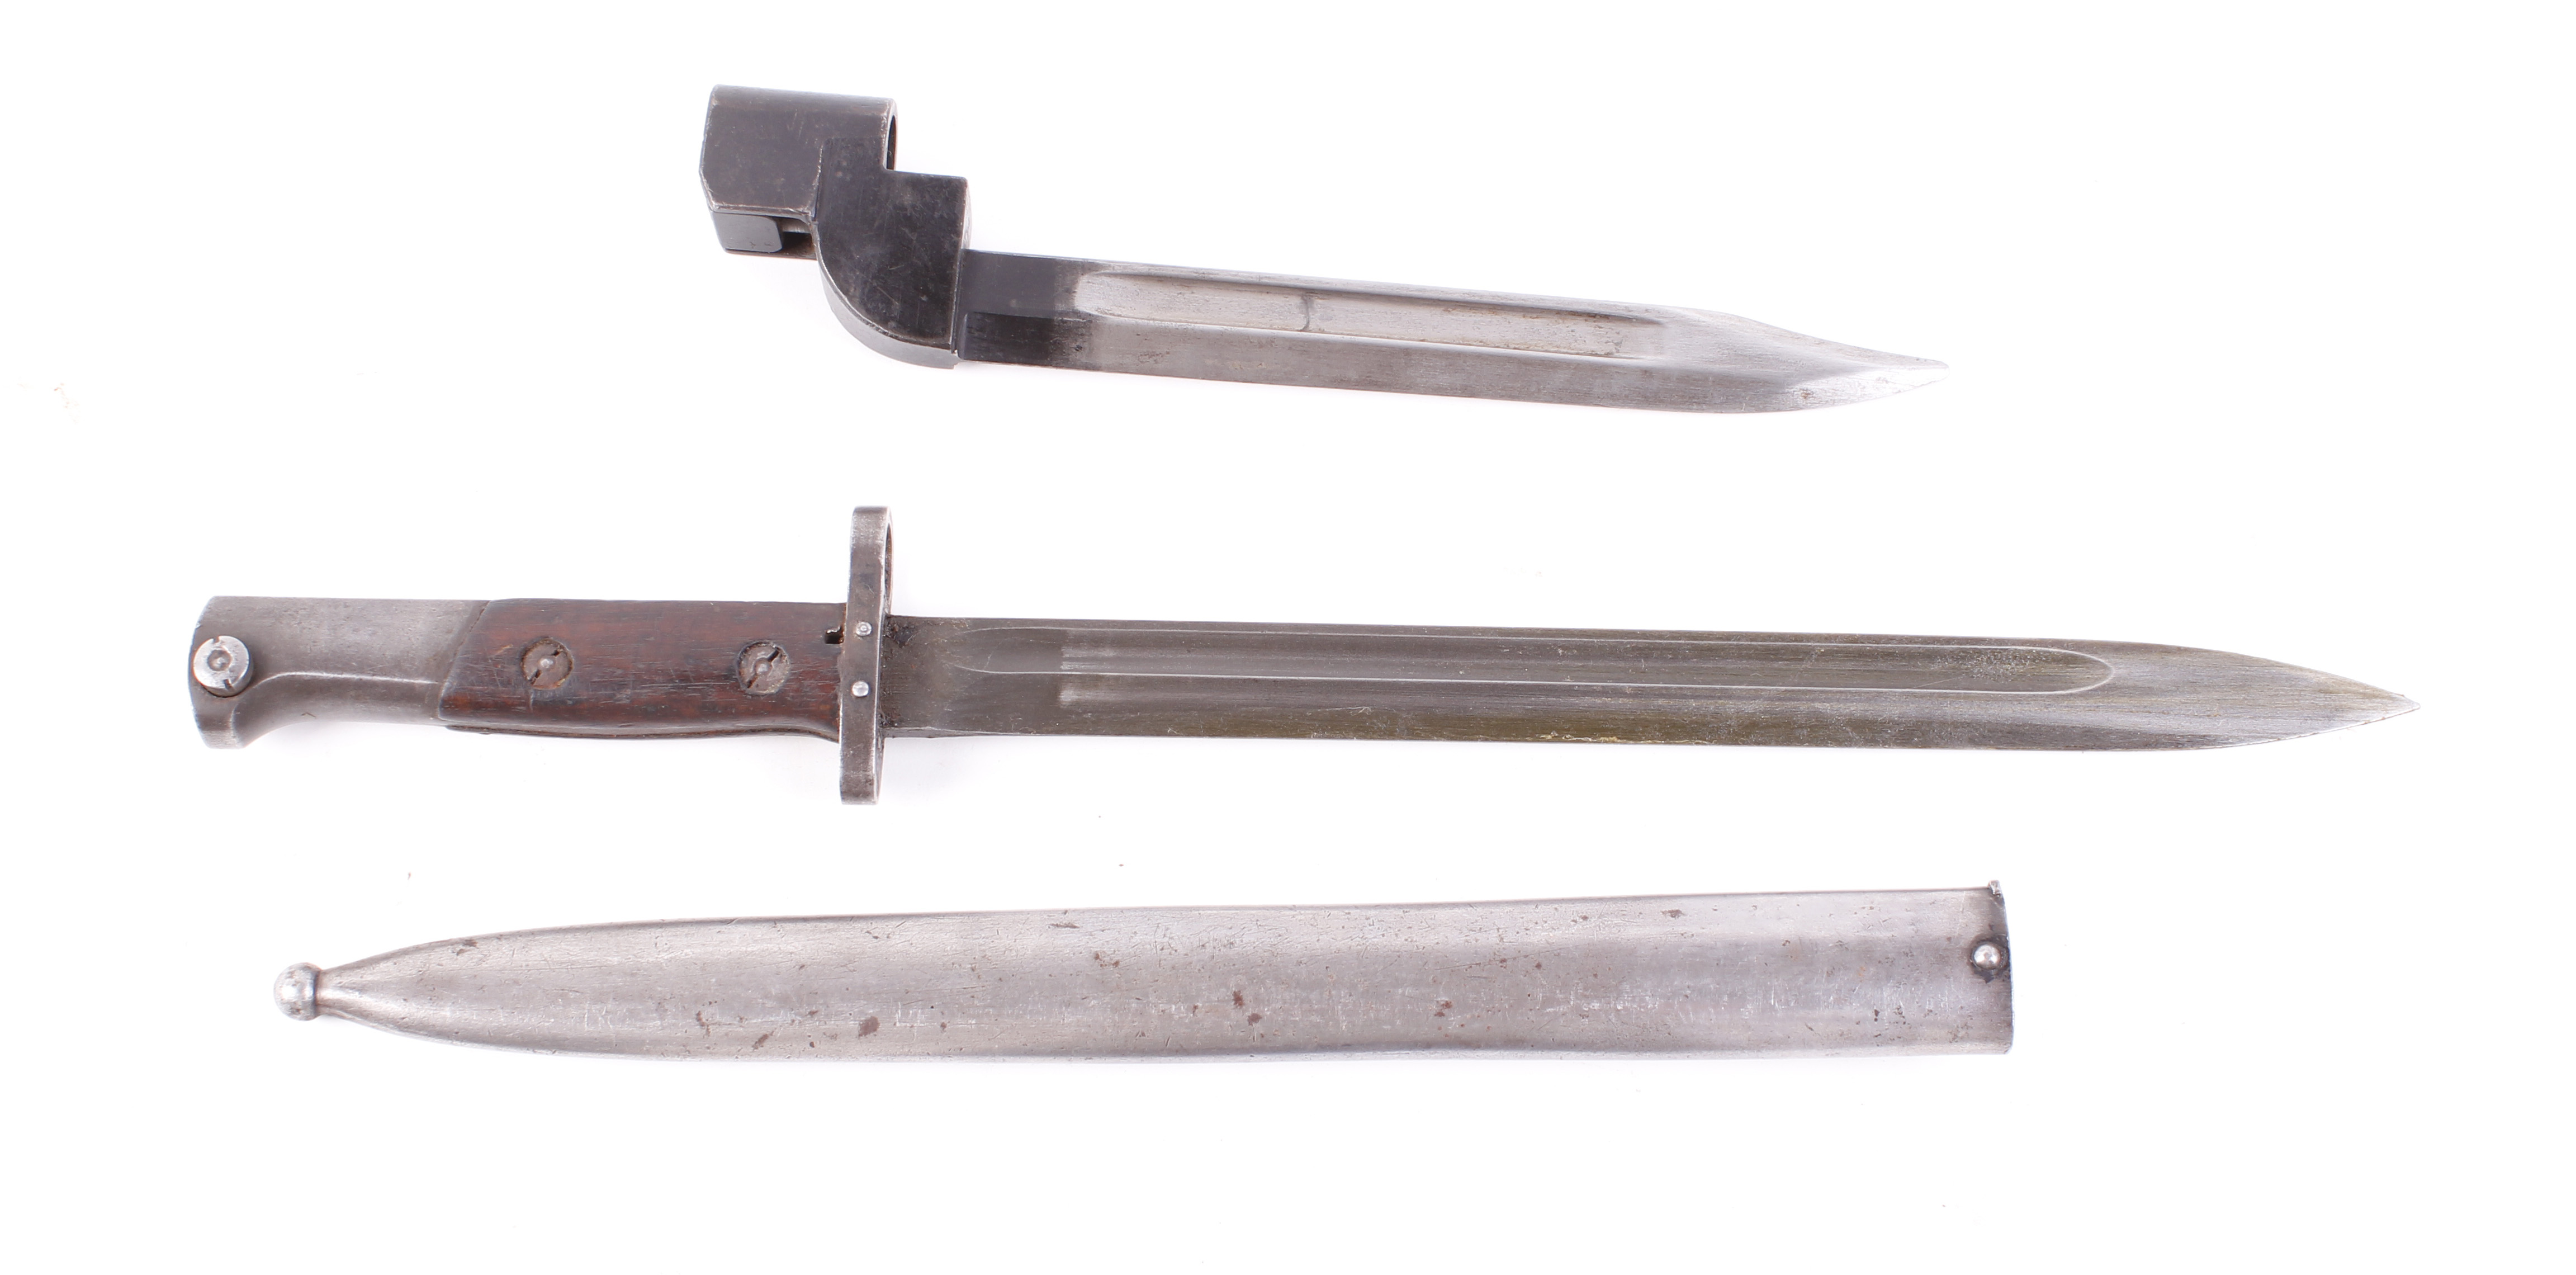 No.9 Mk.1 bayonet marked D 54 G137 D109; Portuguese M1904 Mauser bayonet marked 29754 in metal - Image 2 of 2